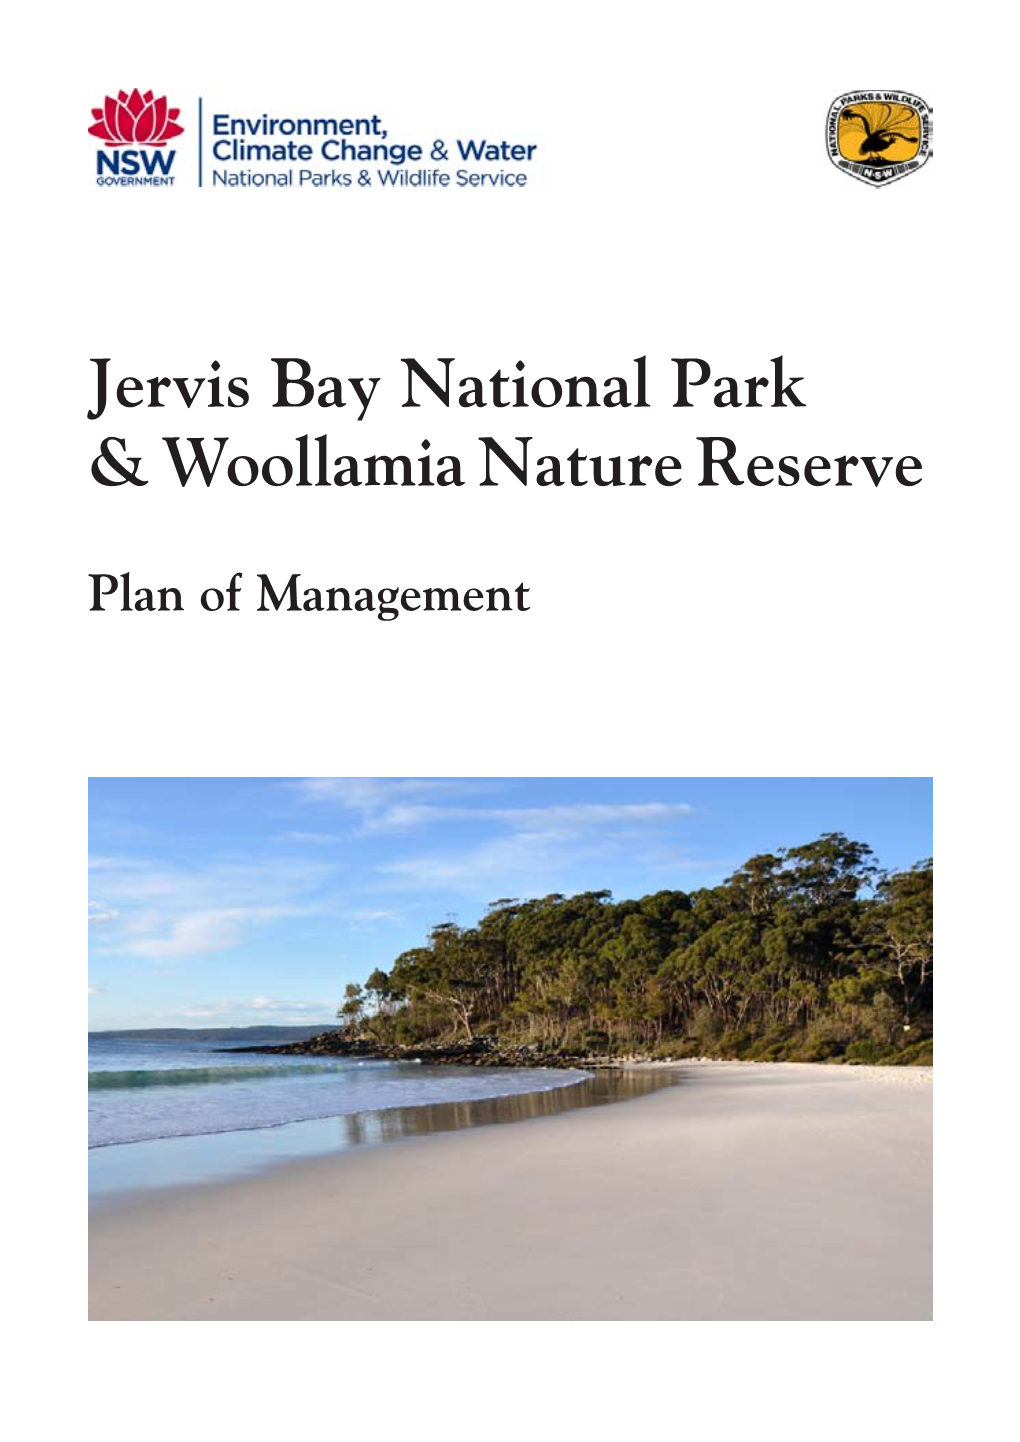 Jervis Bay National Park and Woollamia Nature Reserve Plan of Management